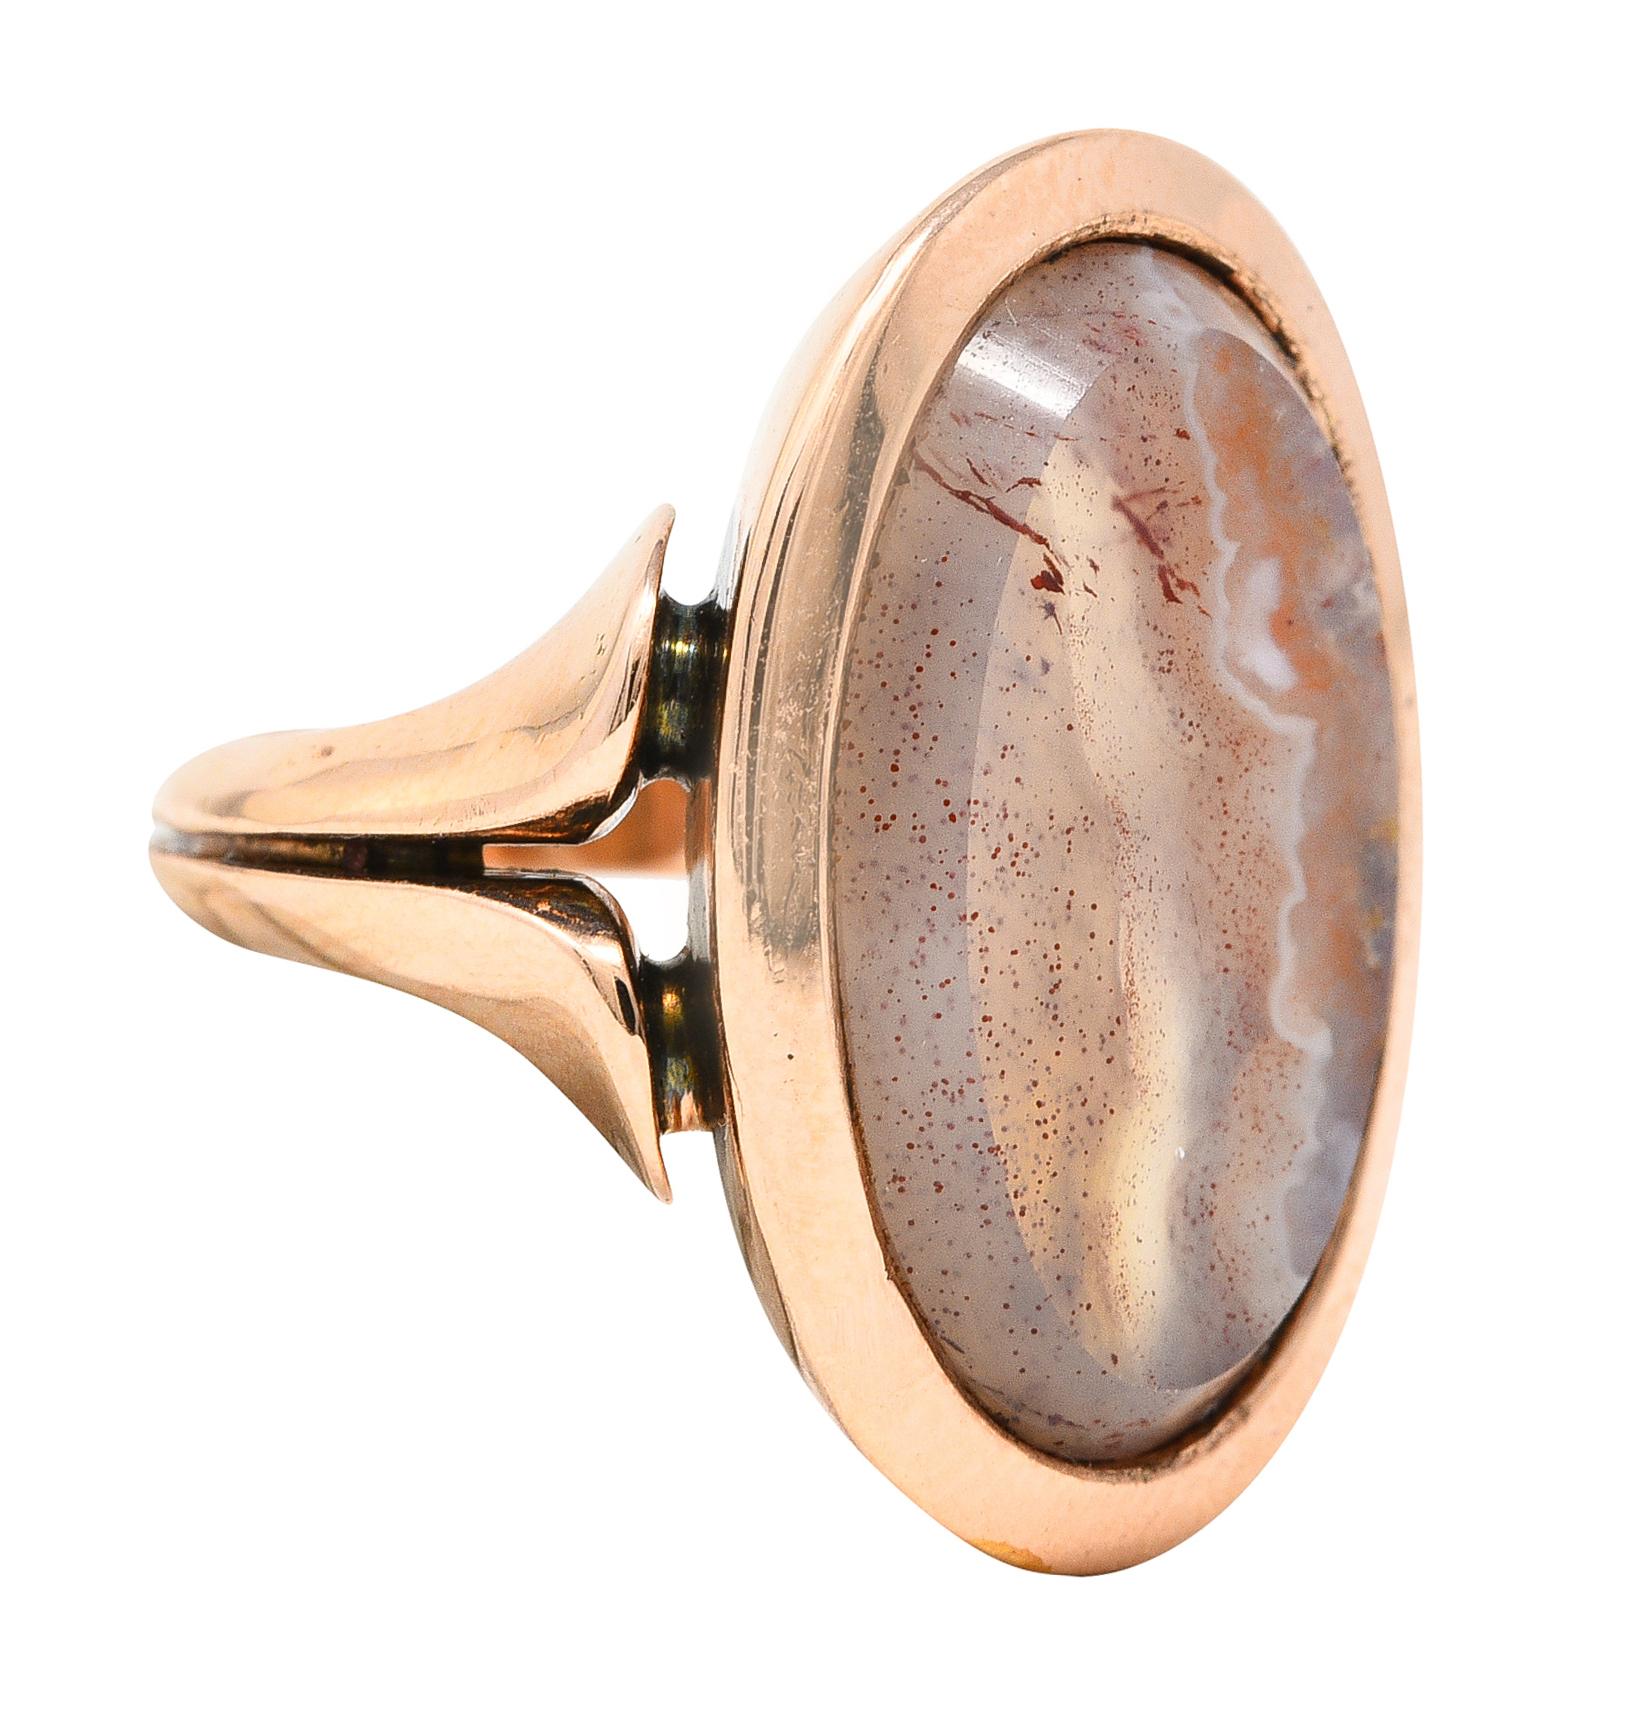 Ring centers a beveled oval shaped agate tablet measuring 11.5 x 18.5 mm. Translucent peach with white and red swirling - bezel set in rose gold frame surround. With split fluted shoulders and grooved shank. Competed by high polished finish. Tested